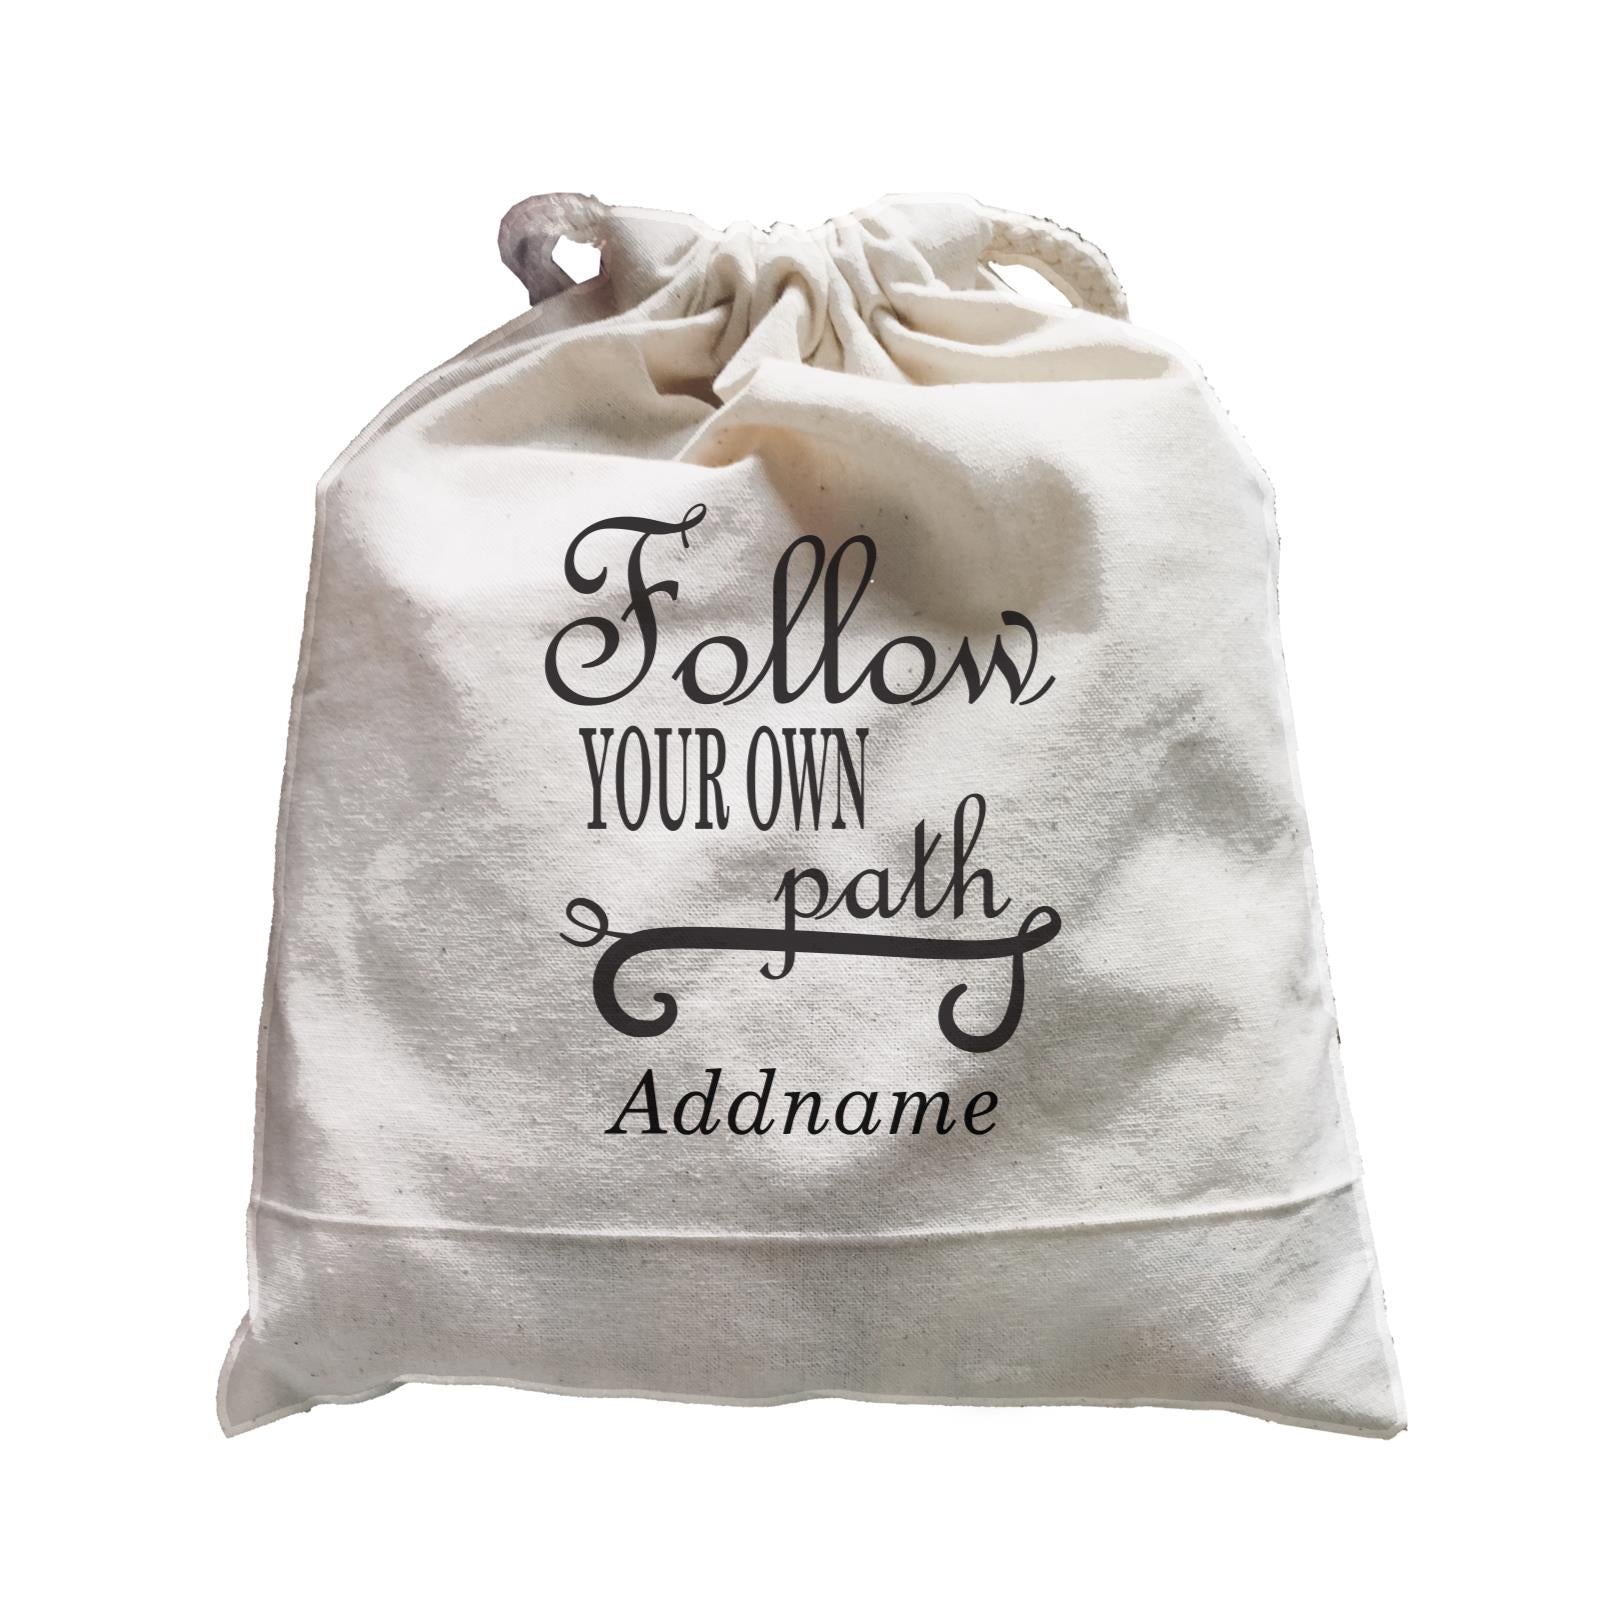 Inspiration Quotes Follow Your Own Path Addname Satchel